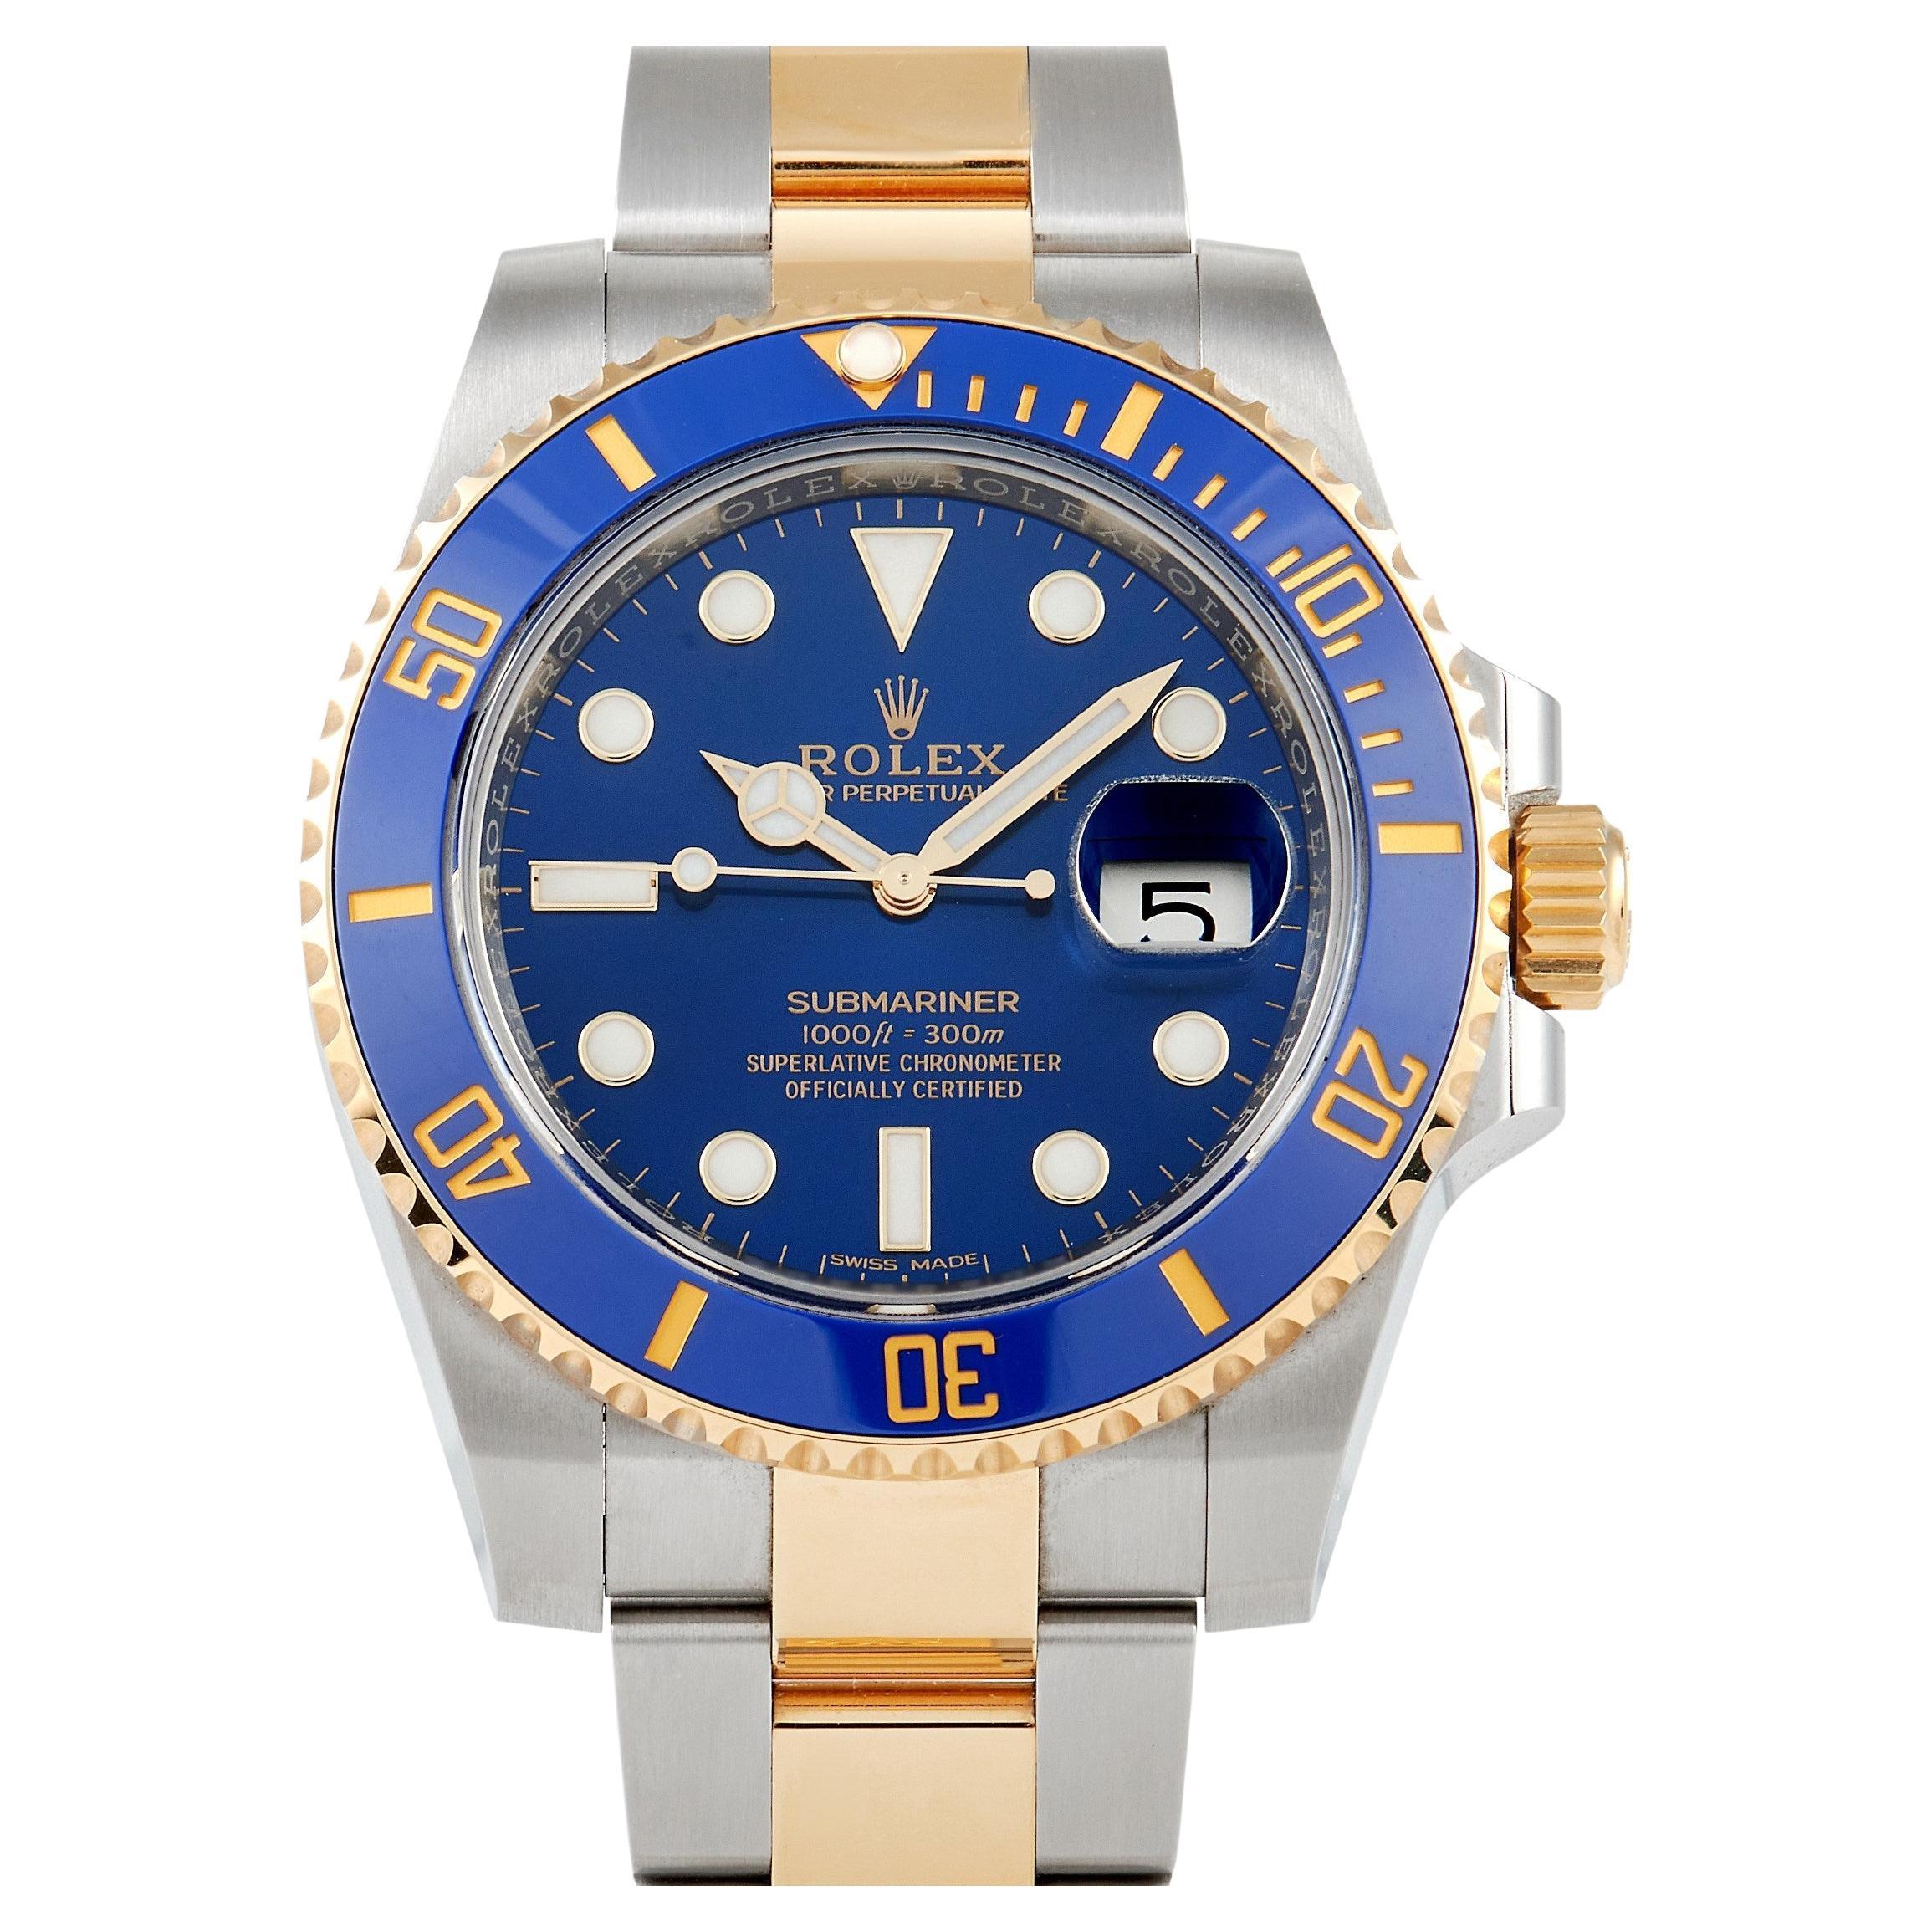 Rolex Submariner Two-Tone Date Watch 116613LB